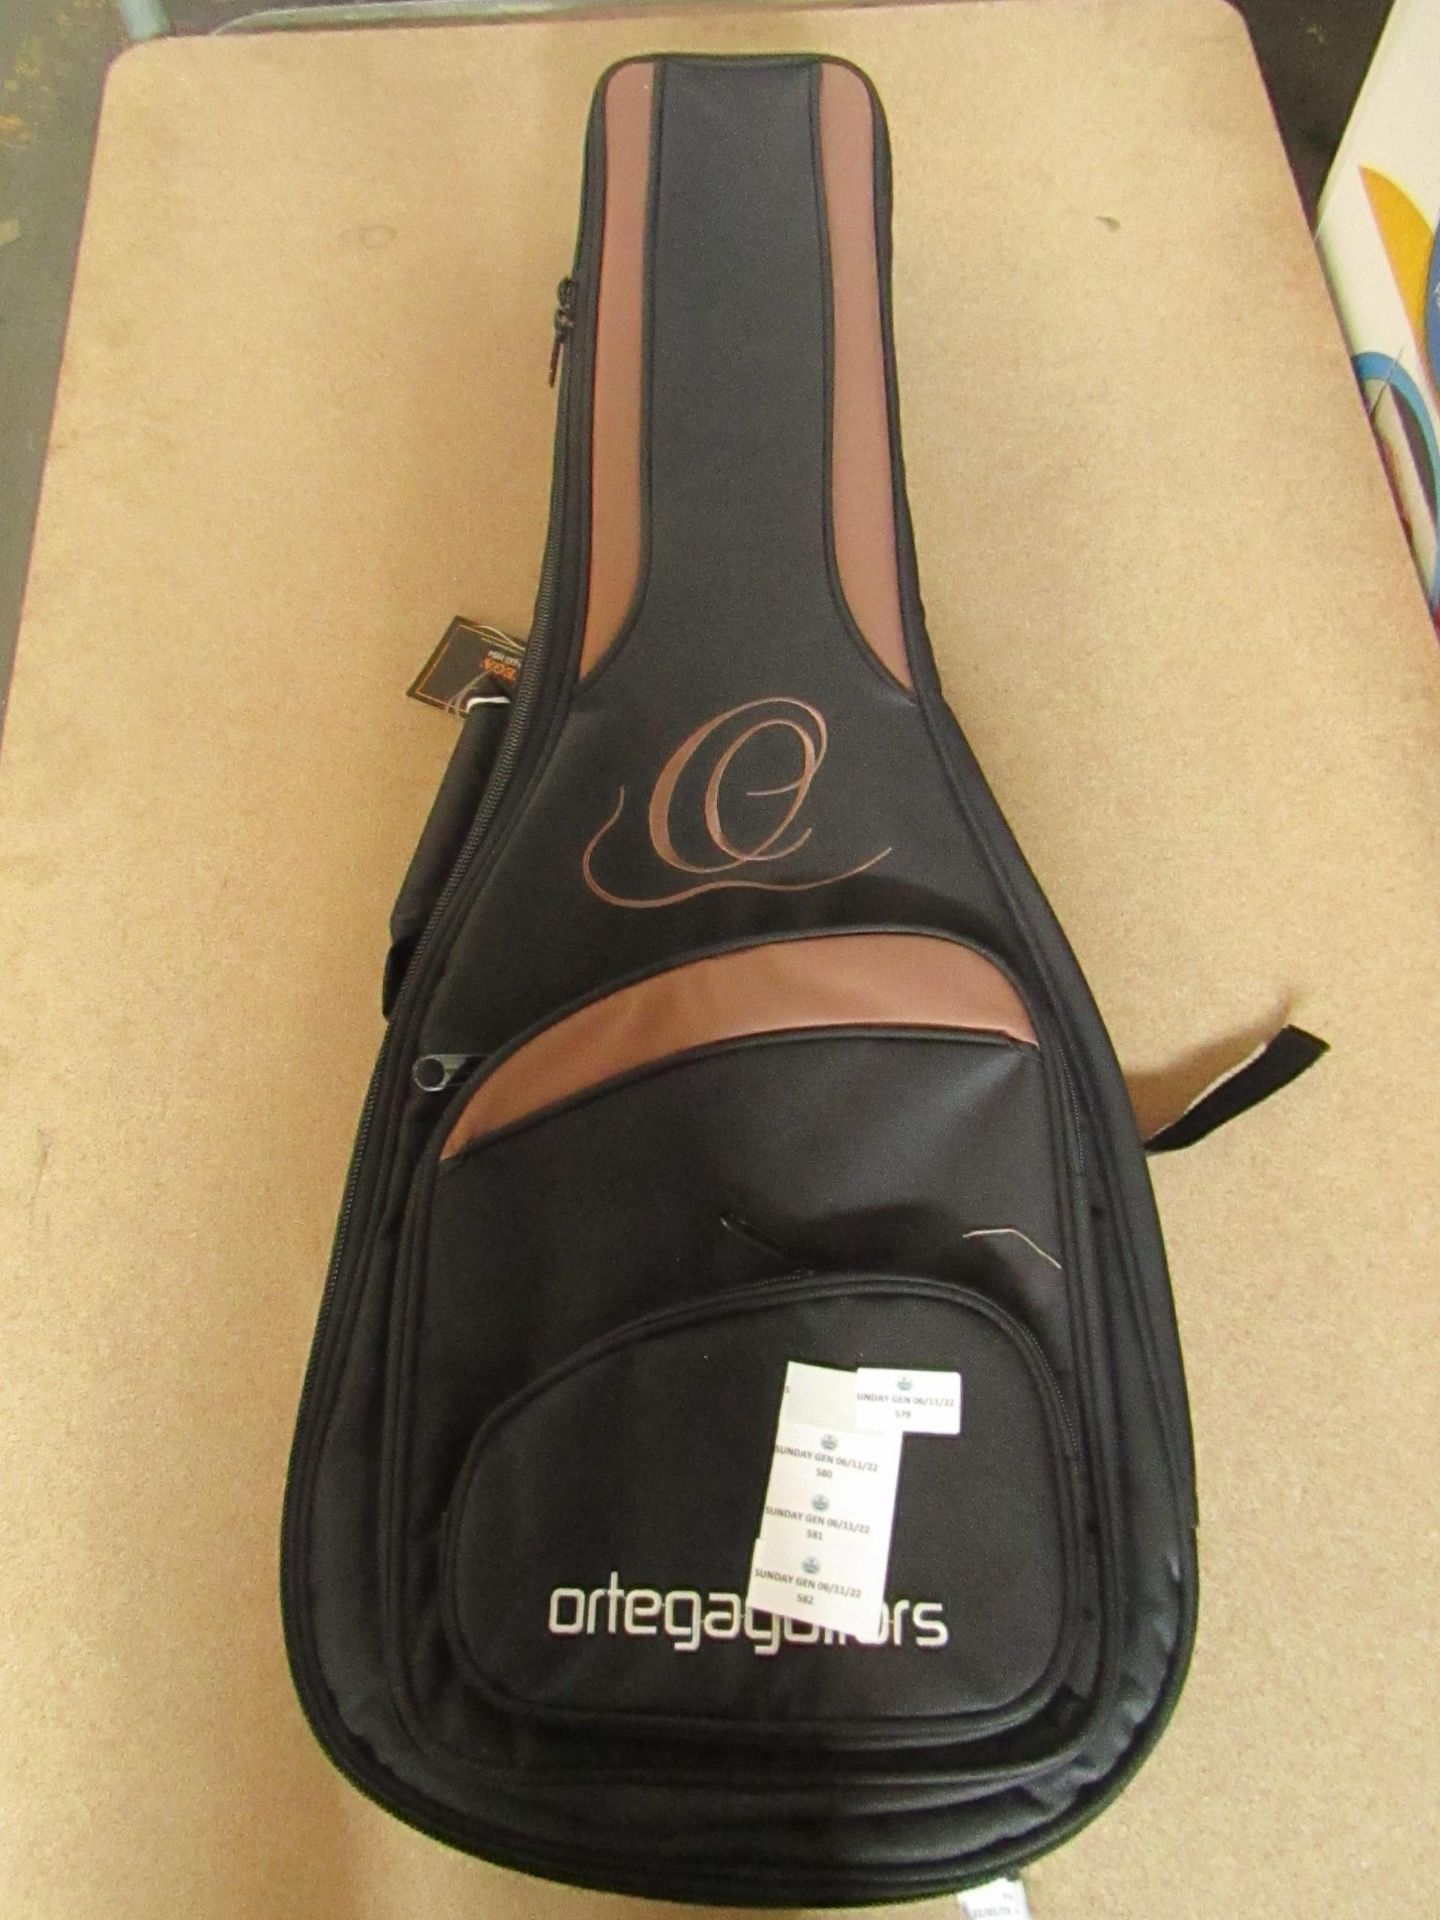 Ortega - Classic Guitar Case Bag ( ONB-12 ) - Good Condition & Packaged.